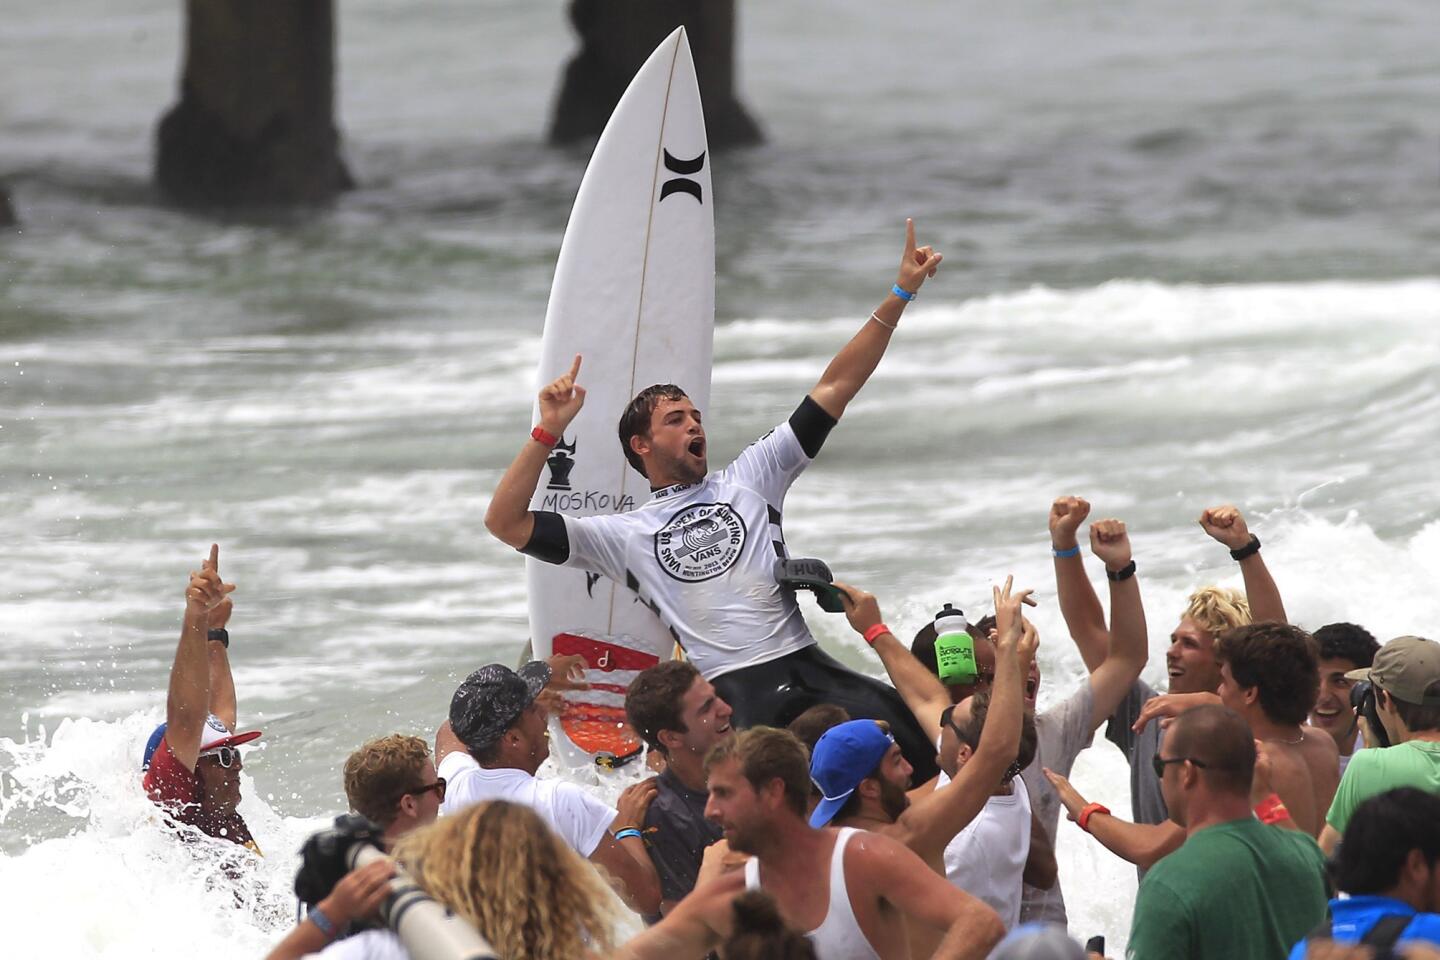 After memorable surfing championships, focus goes to Olympics - Los Angeles  Times